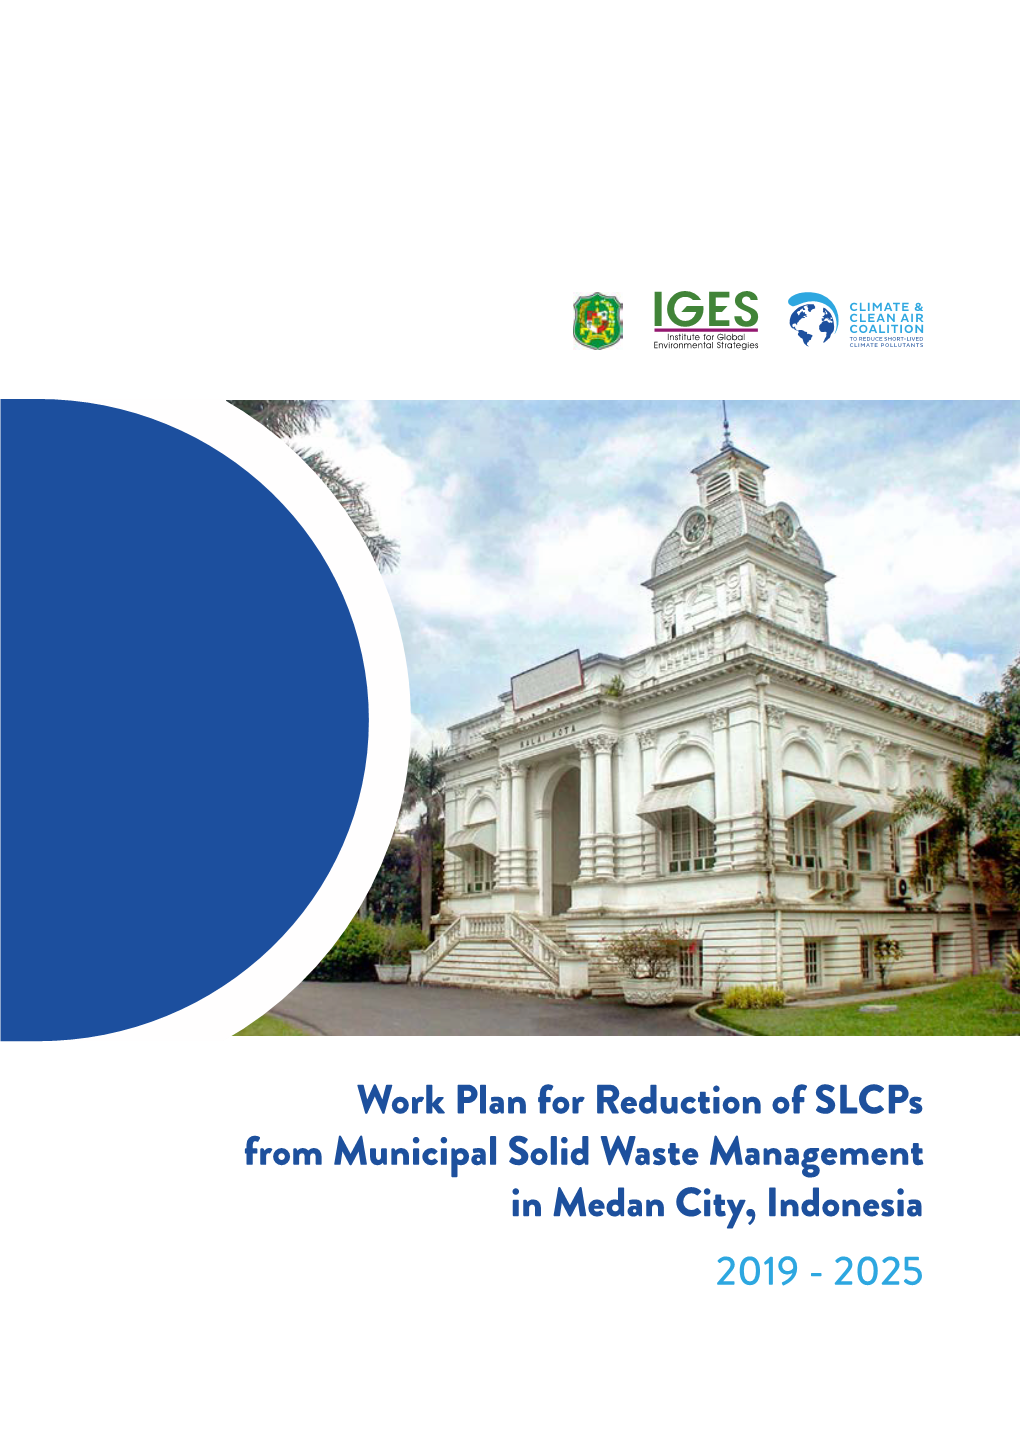 Work Plan for Reduction of Slcps from Municipal Solid Waste